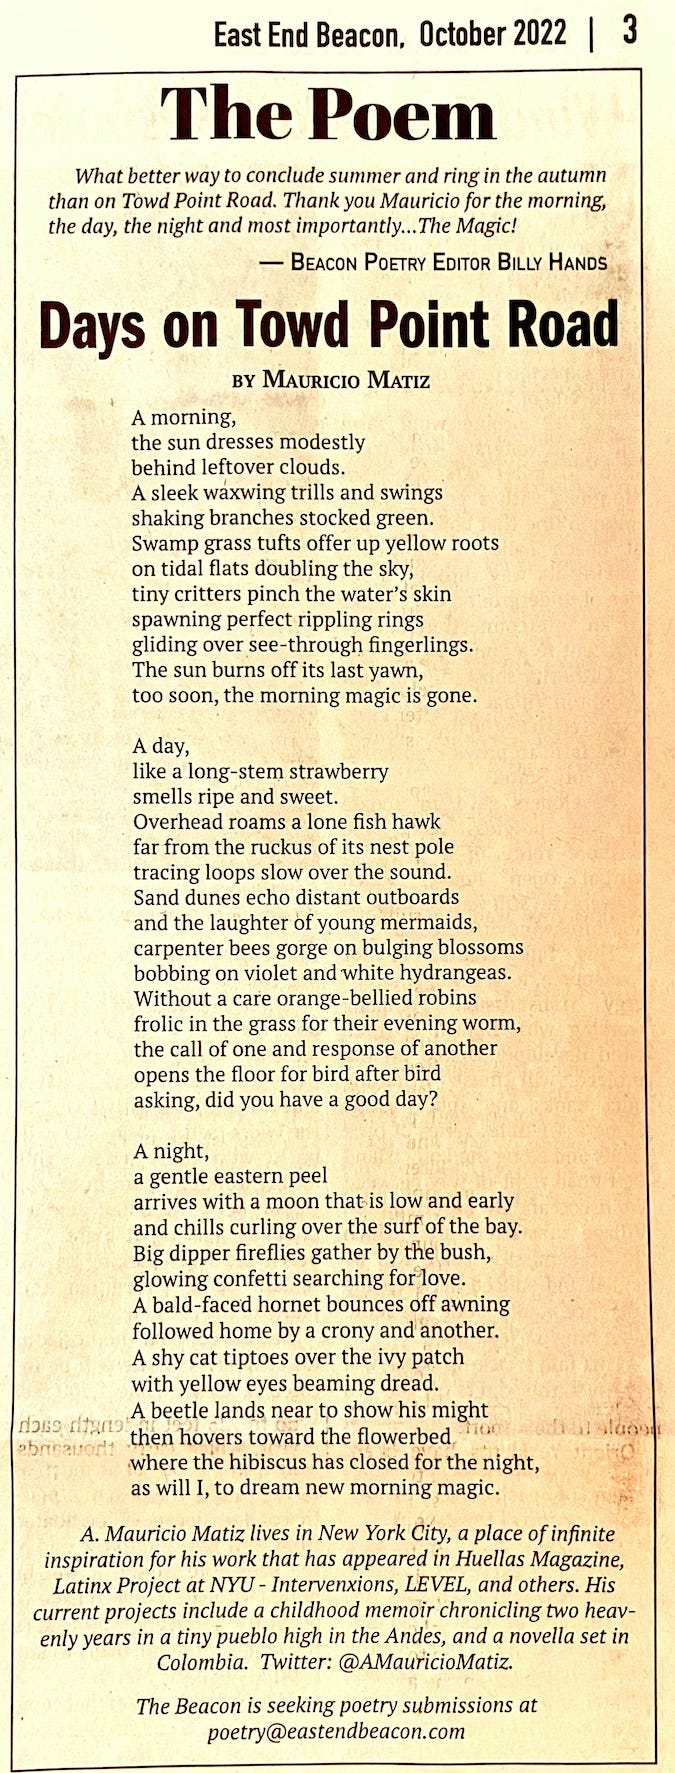 Scan of poem from the East End Beacon newspaper, October 2022 issue.